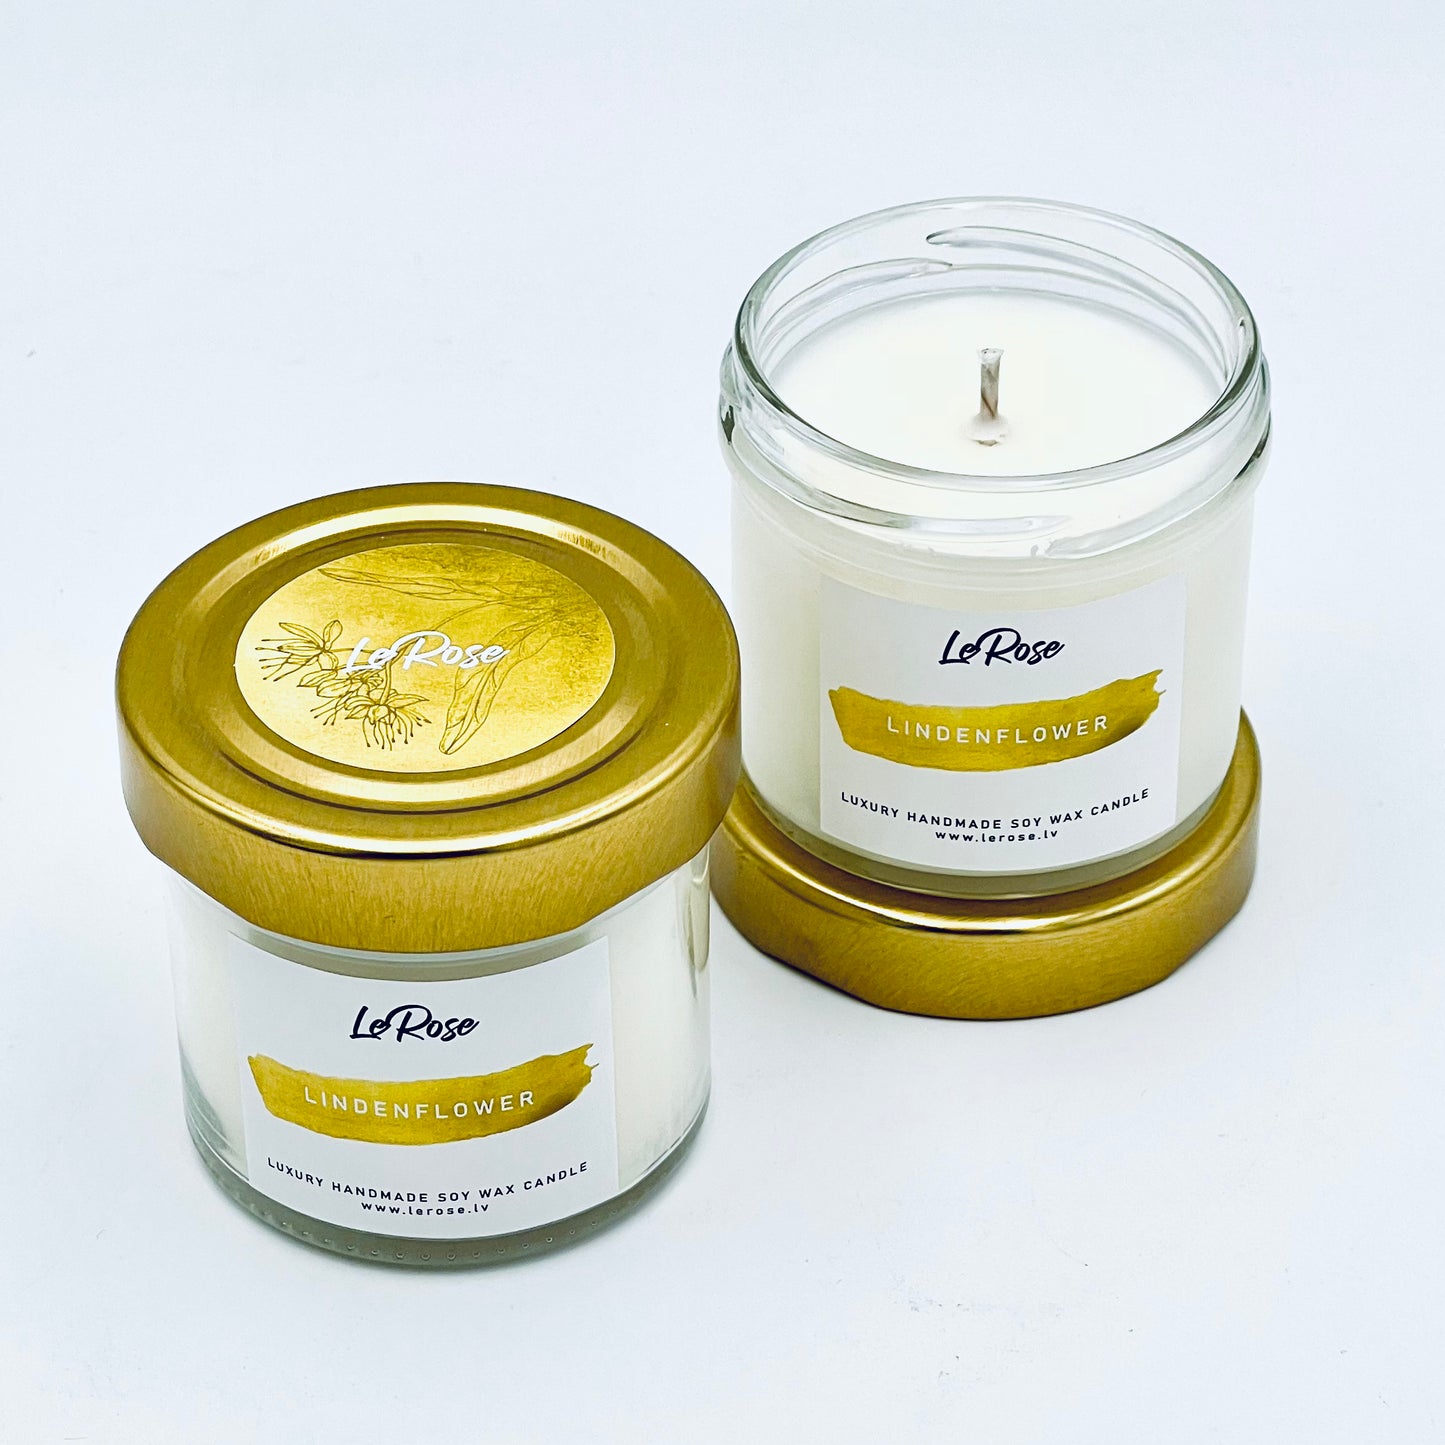 Soy wax candle "LeRose" Lindenflower, 25 h